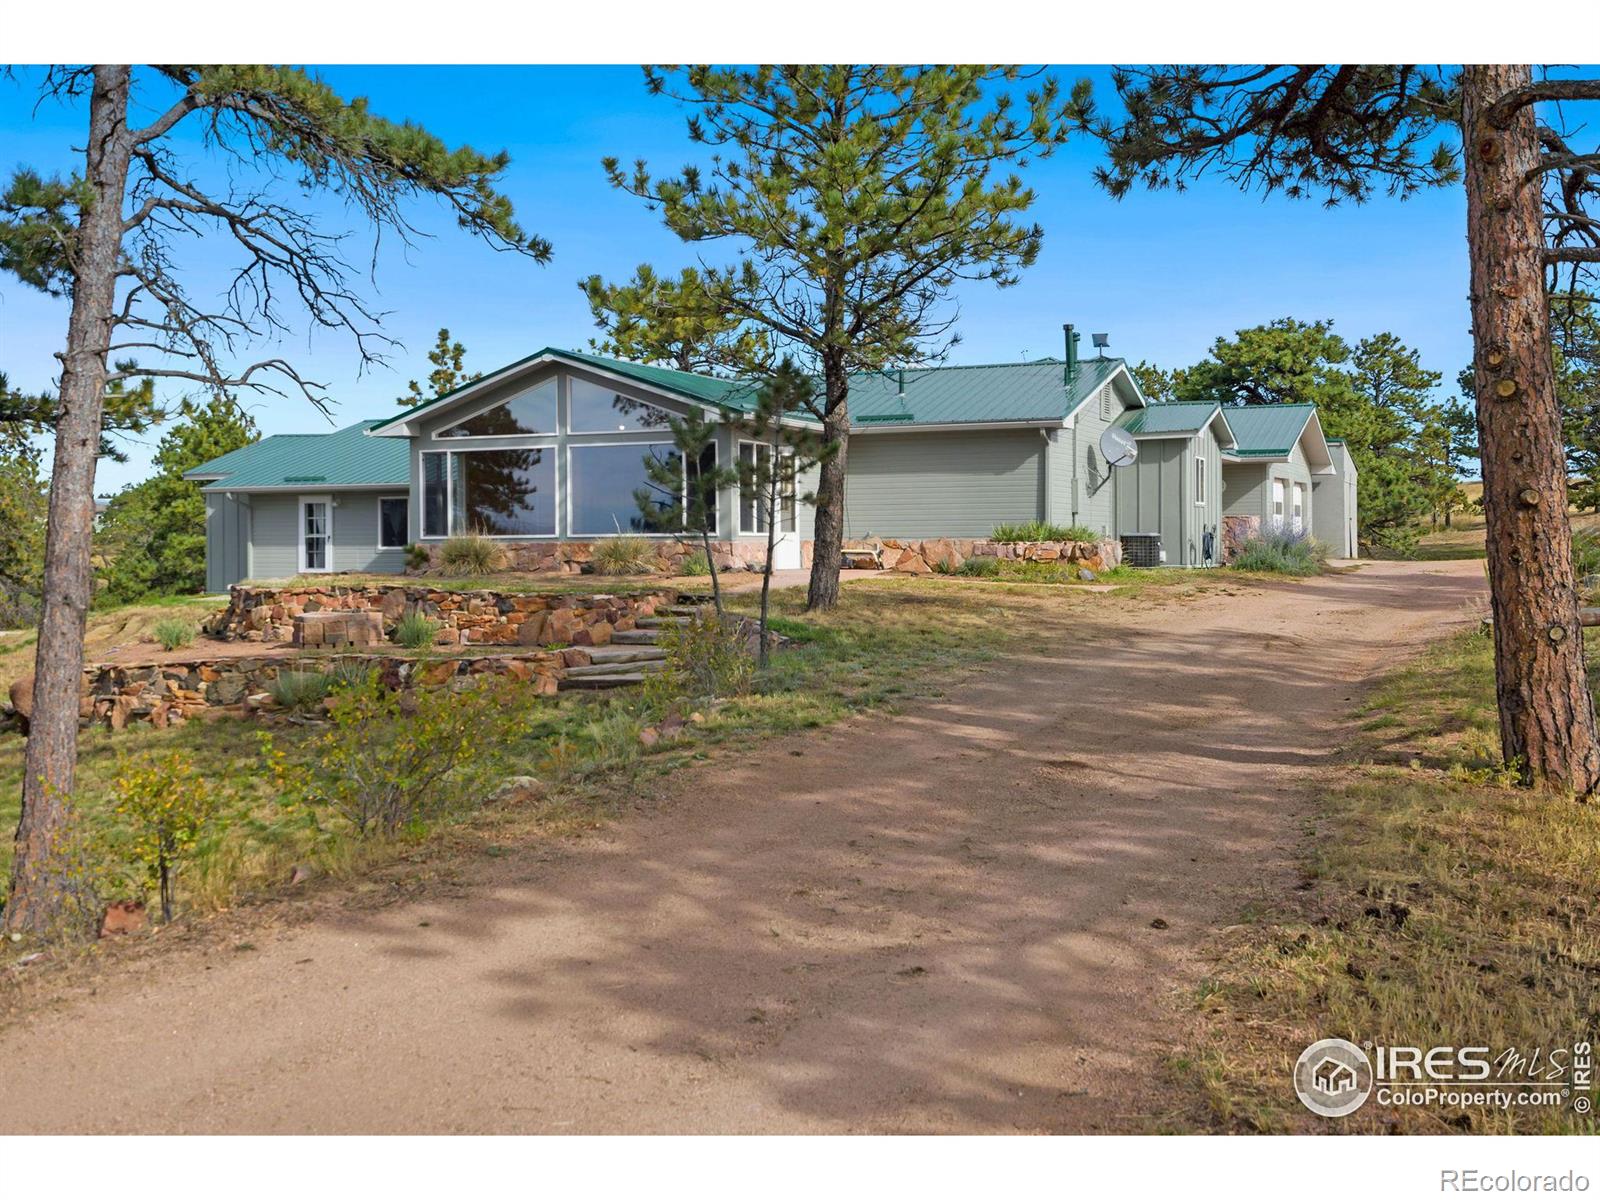 Report Image for 7770  Red Mountain Road,Livermore, Colorado